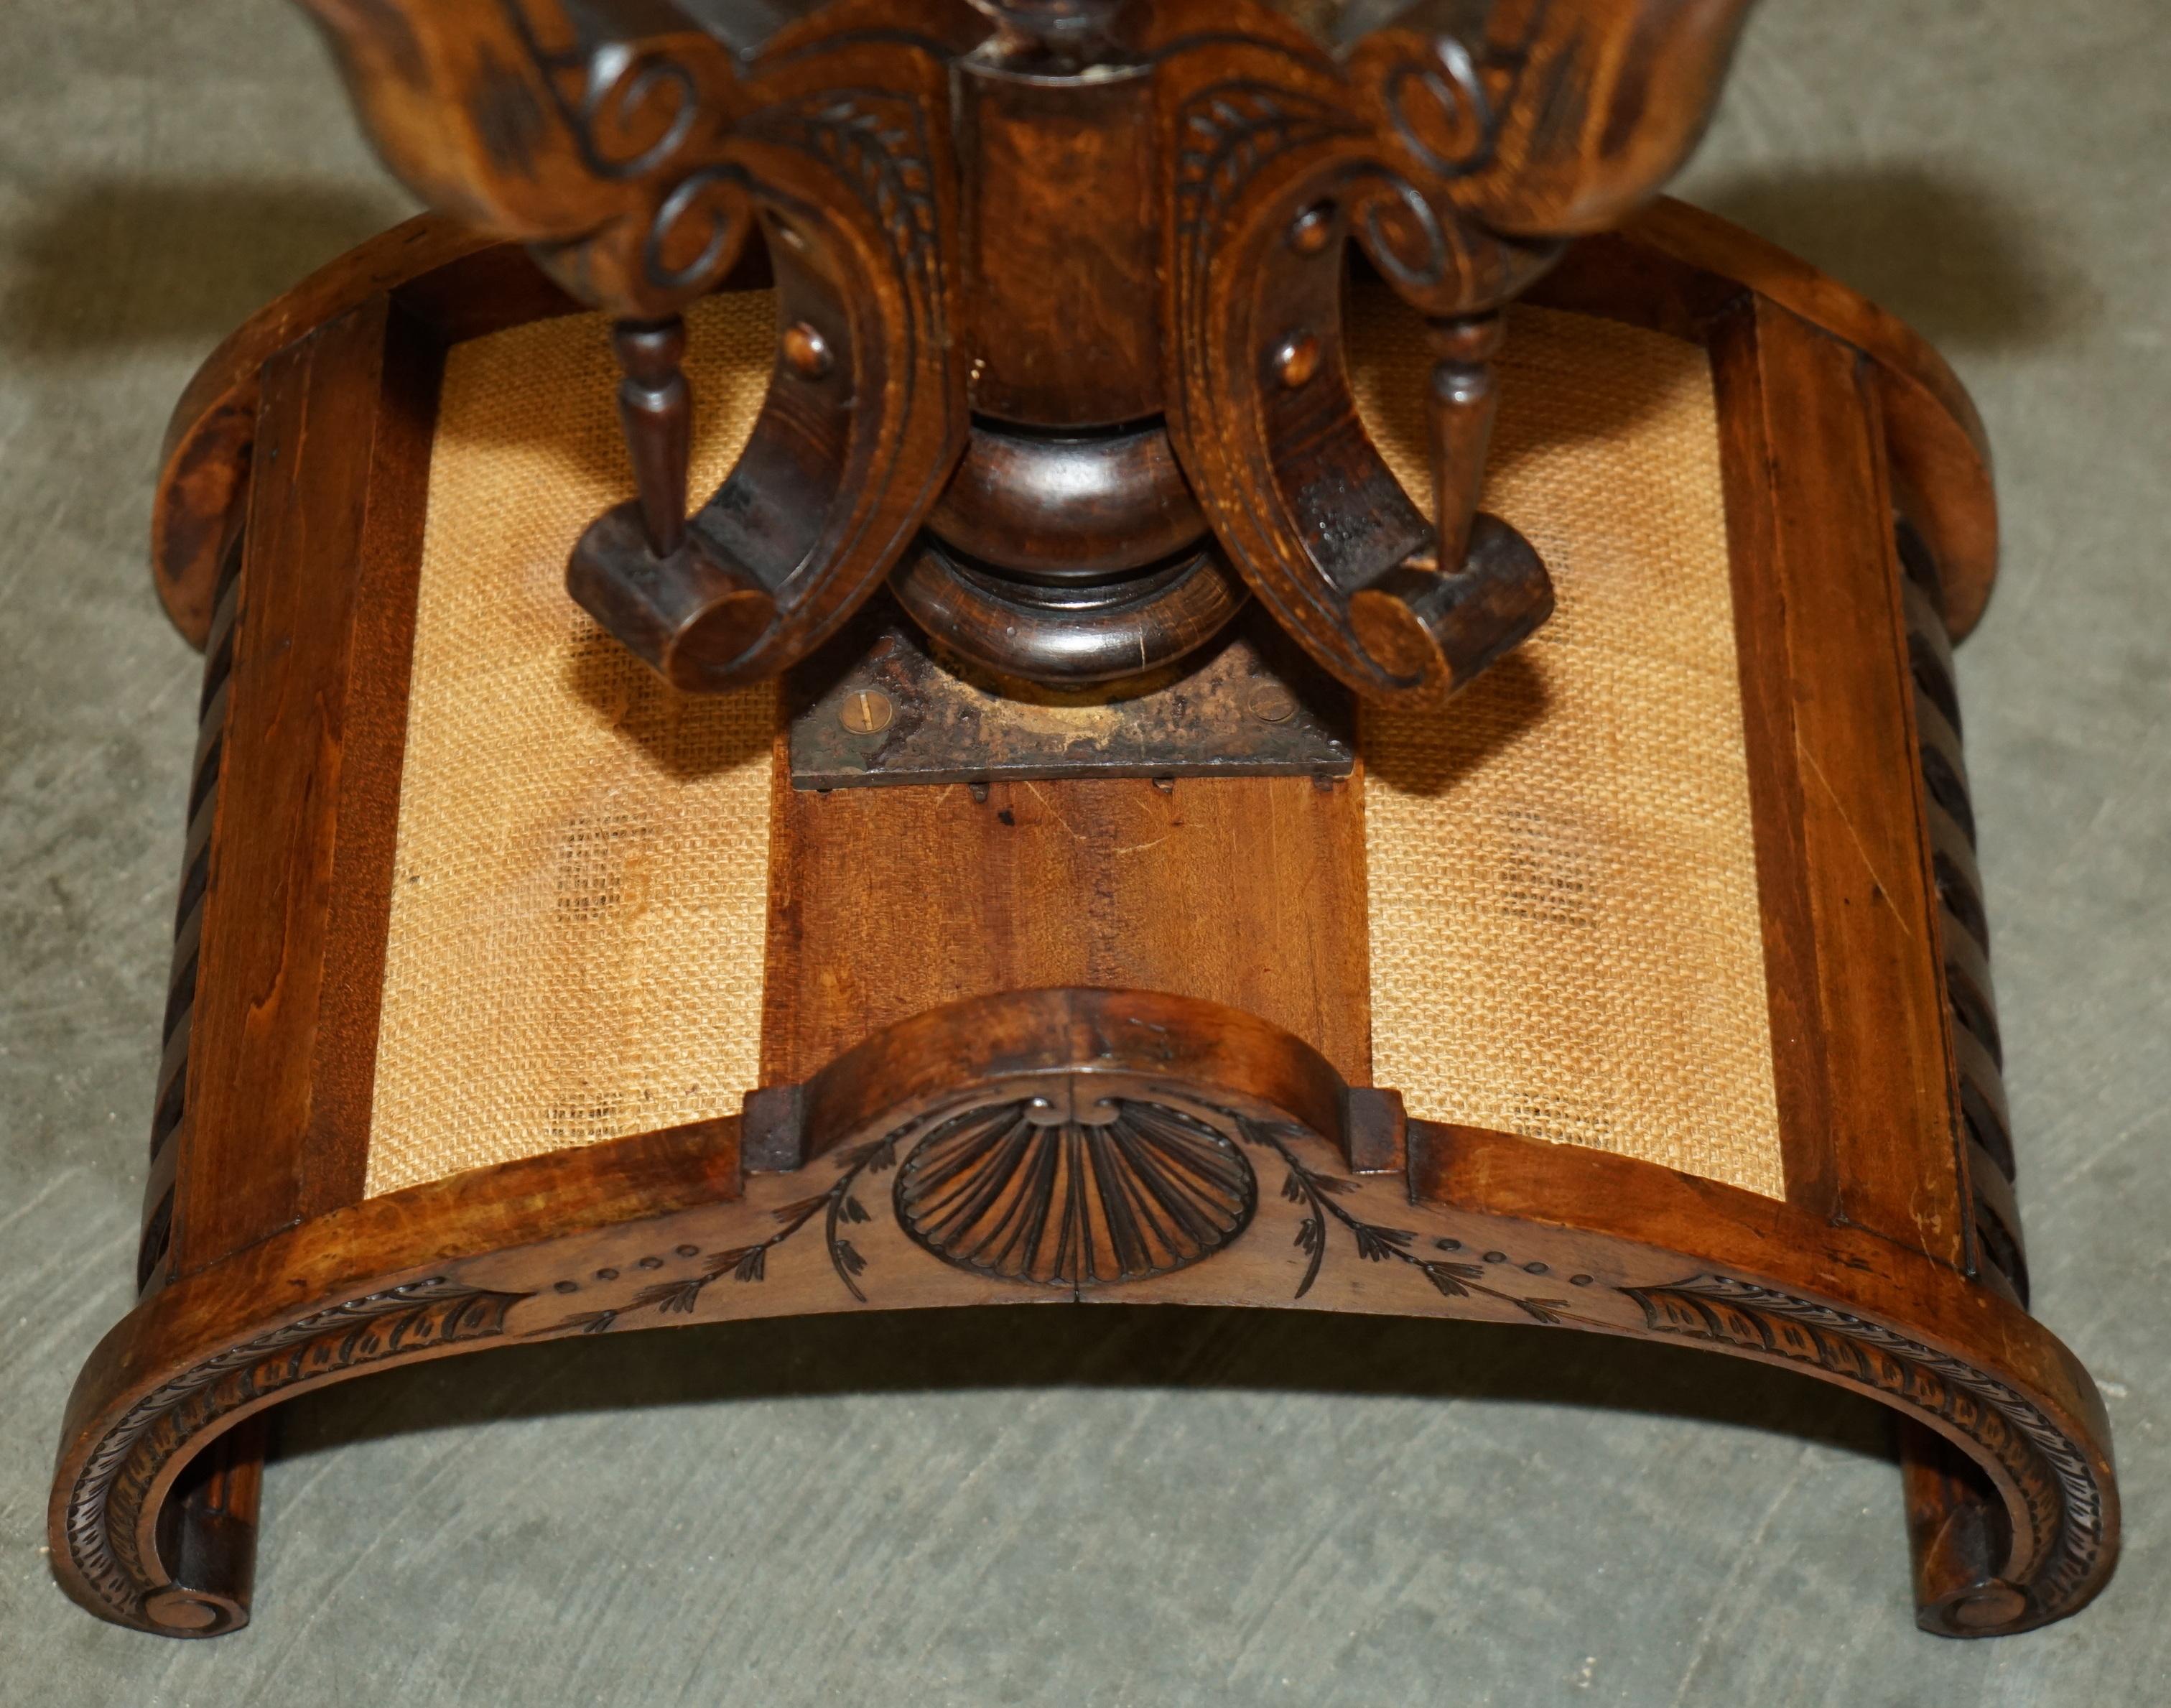 ViCtorian WALNUT MUSIC DRESSING TABLE STOOL DECORATIVE BASE CURVED SEAT ANTIQUE en vente 11